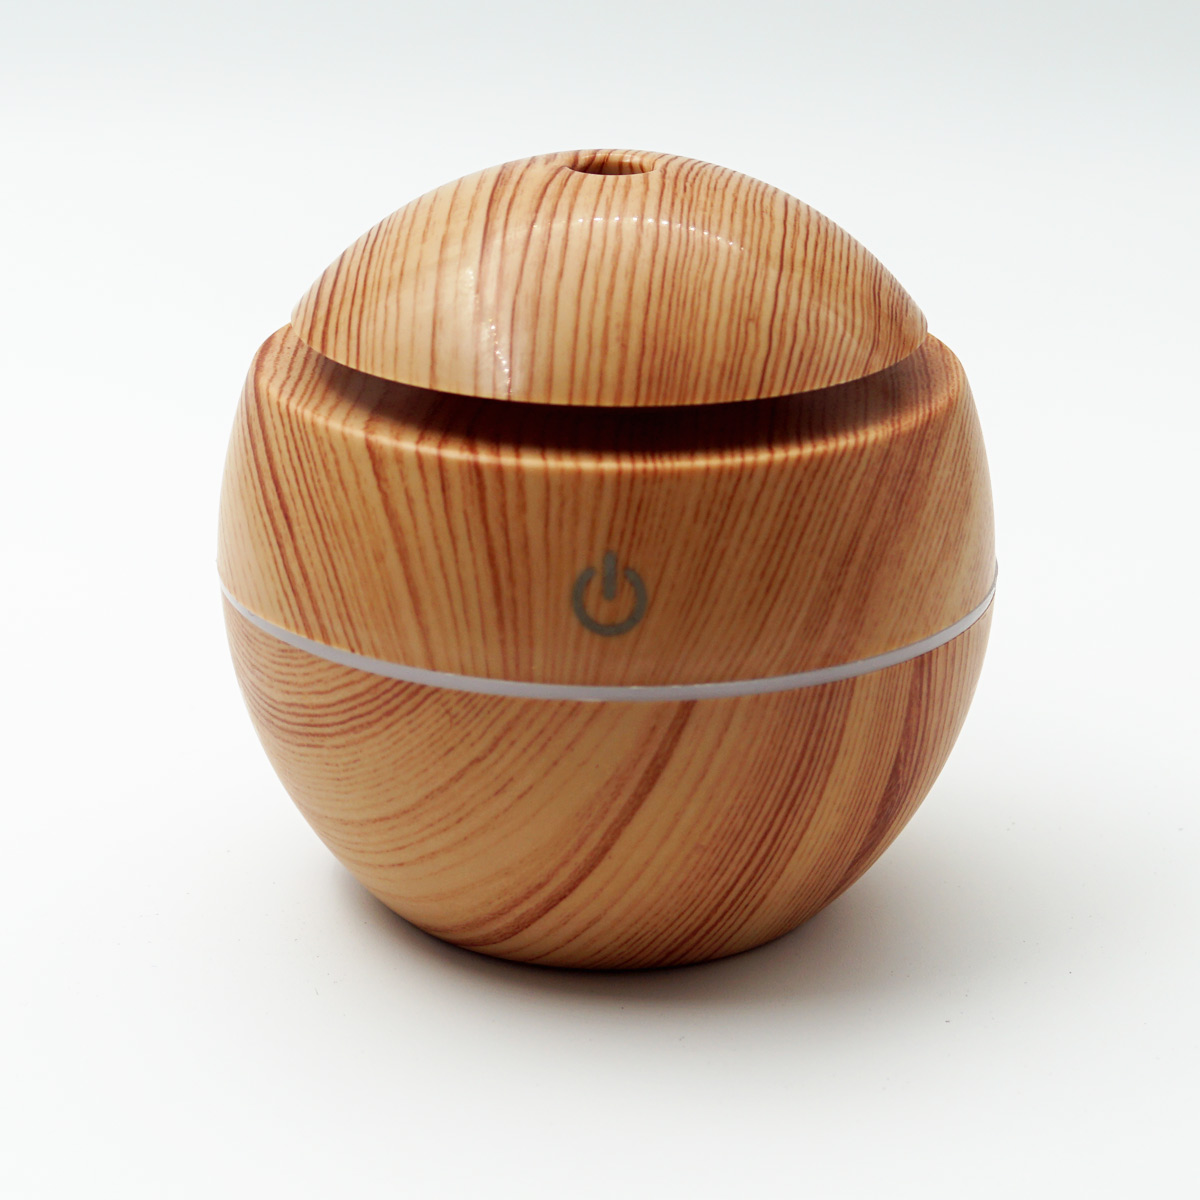 penhouse.in SL-001 002 Portable Mini Wooden Air Humidifiers Aromatherapy Ultrasonic Humidifier Oil Aroma Diffuser Usb Purifier Color Changing Led Touch Switch Atomization Humidifier For Home Office and Car SKU 96601